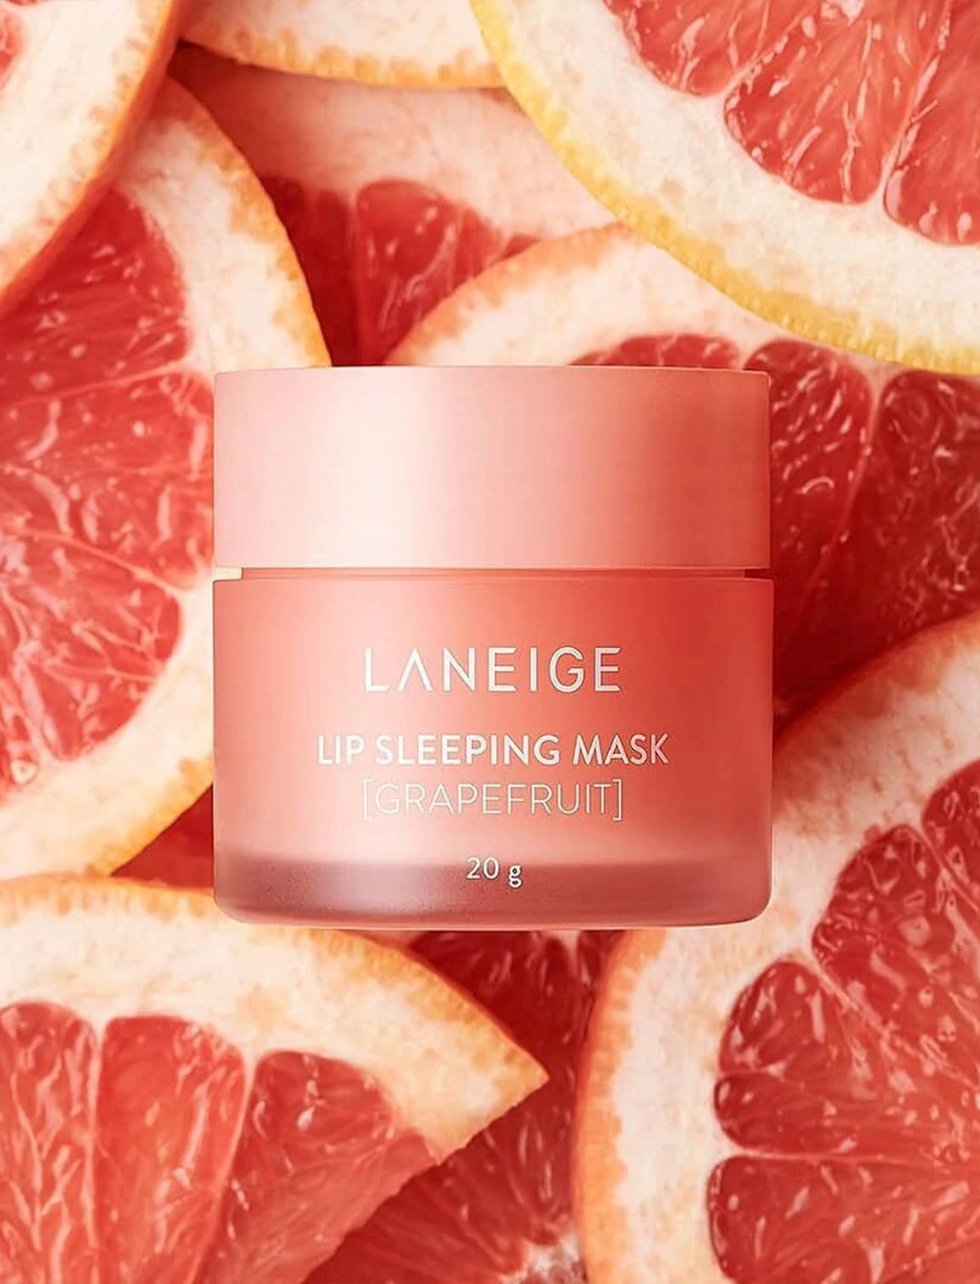 Lip night mask with grapefruit flavor by Laneige (Laneige Lip Sleeping Mask Grapefruit)